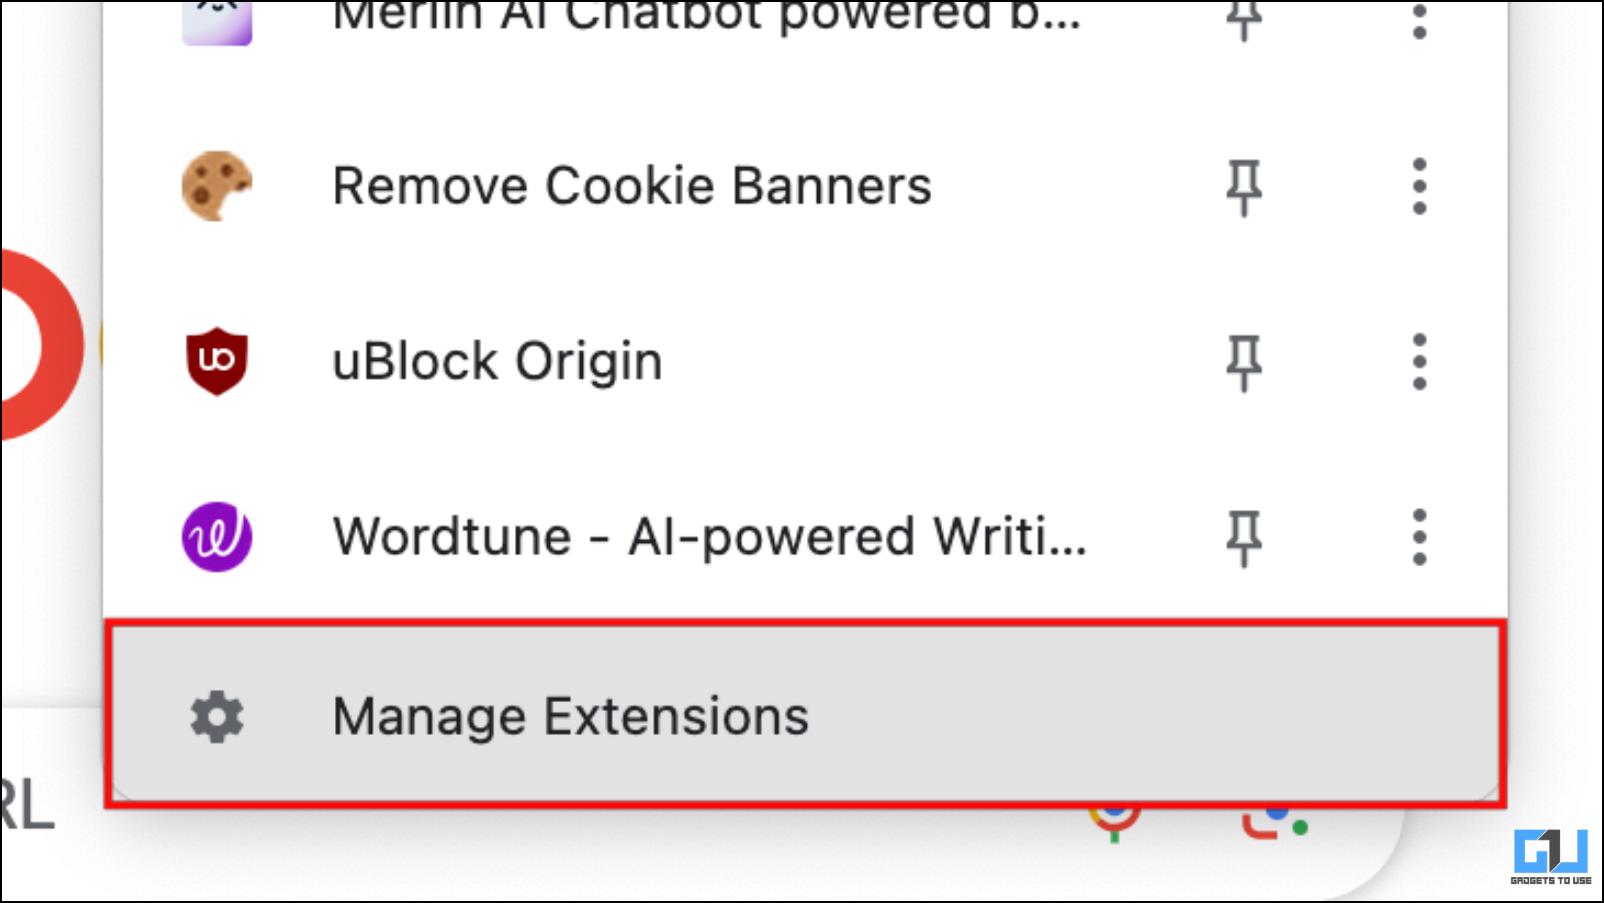 Go to the Manage Extensions Menu